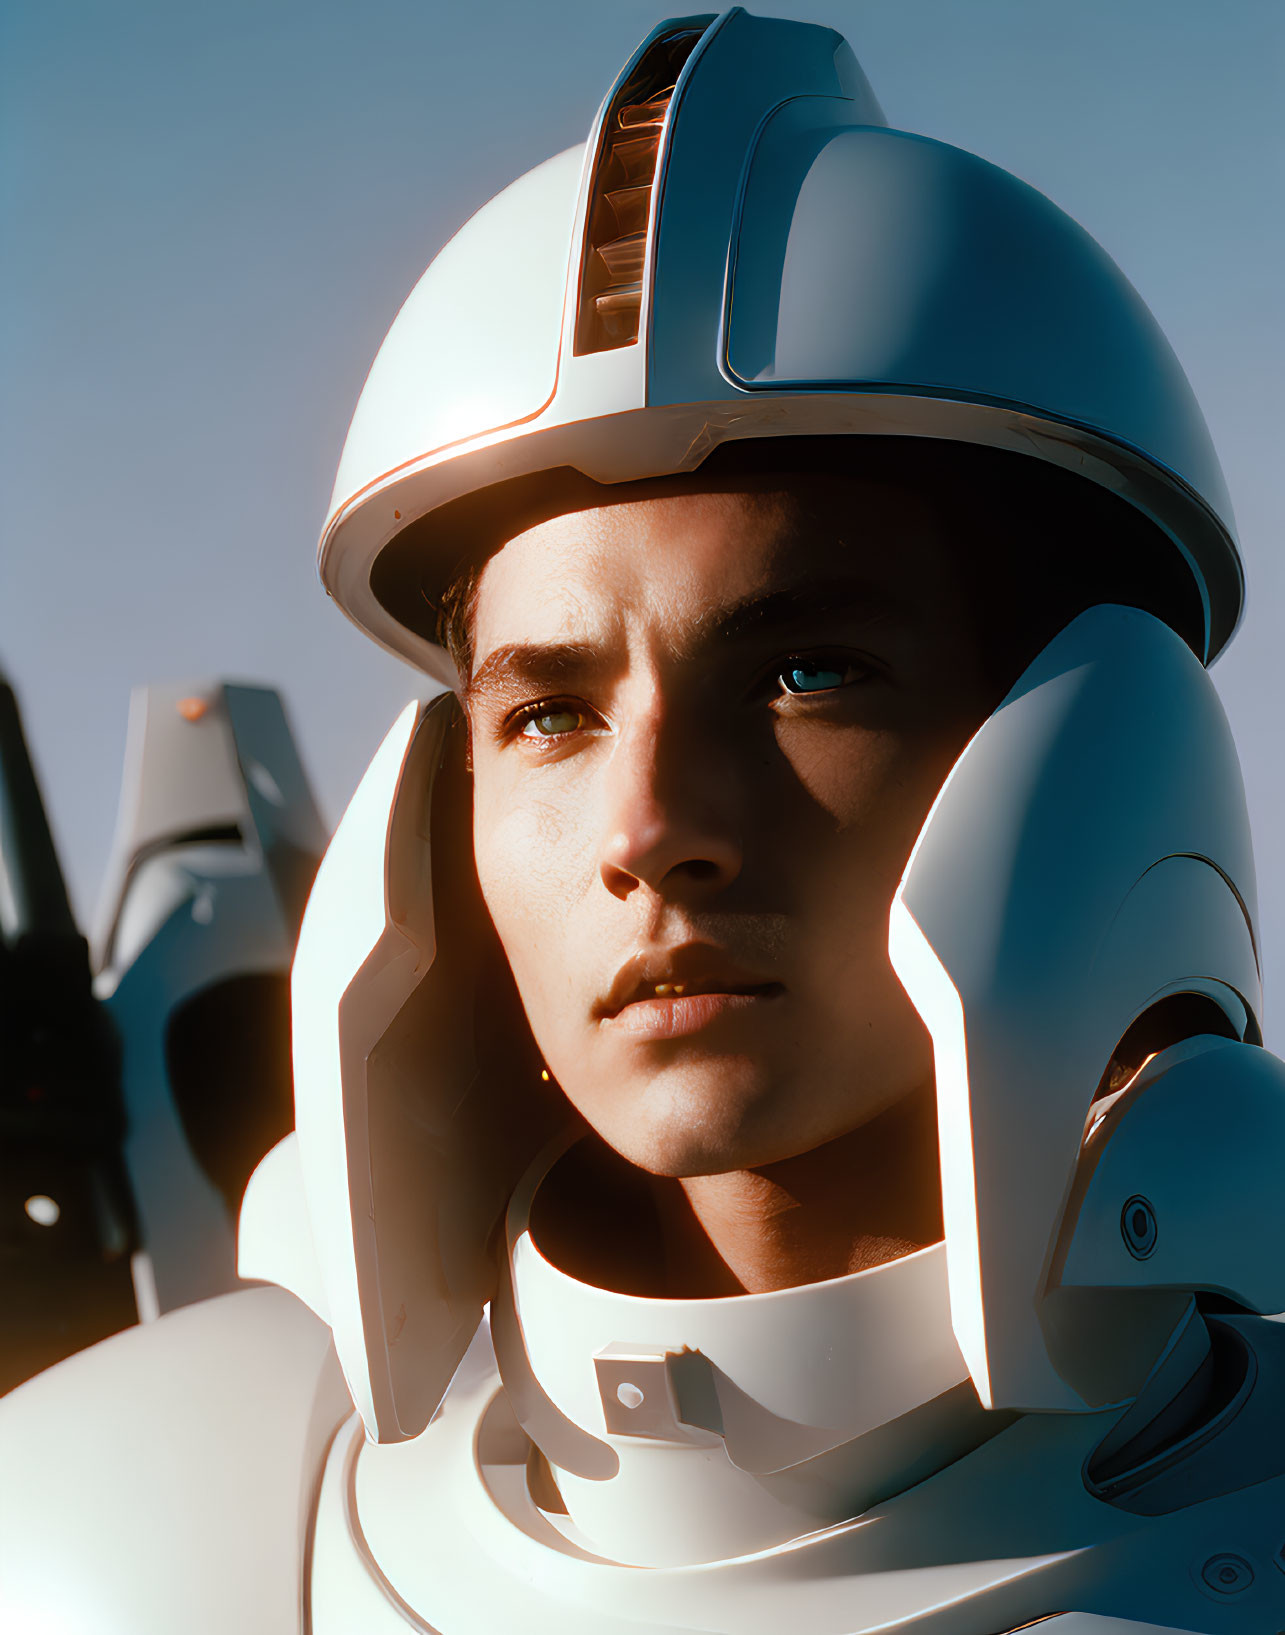 Person in White Futuristic Helmet with Sunlight Shadows